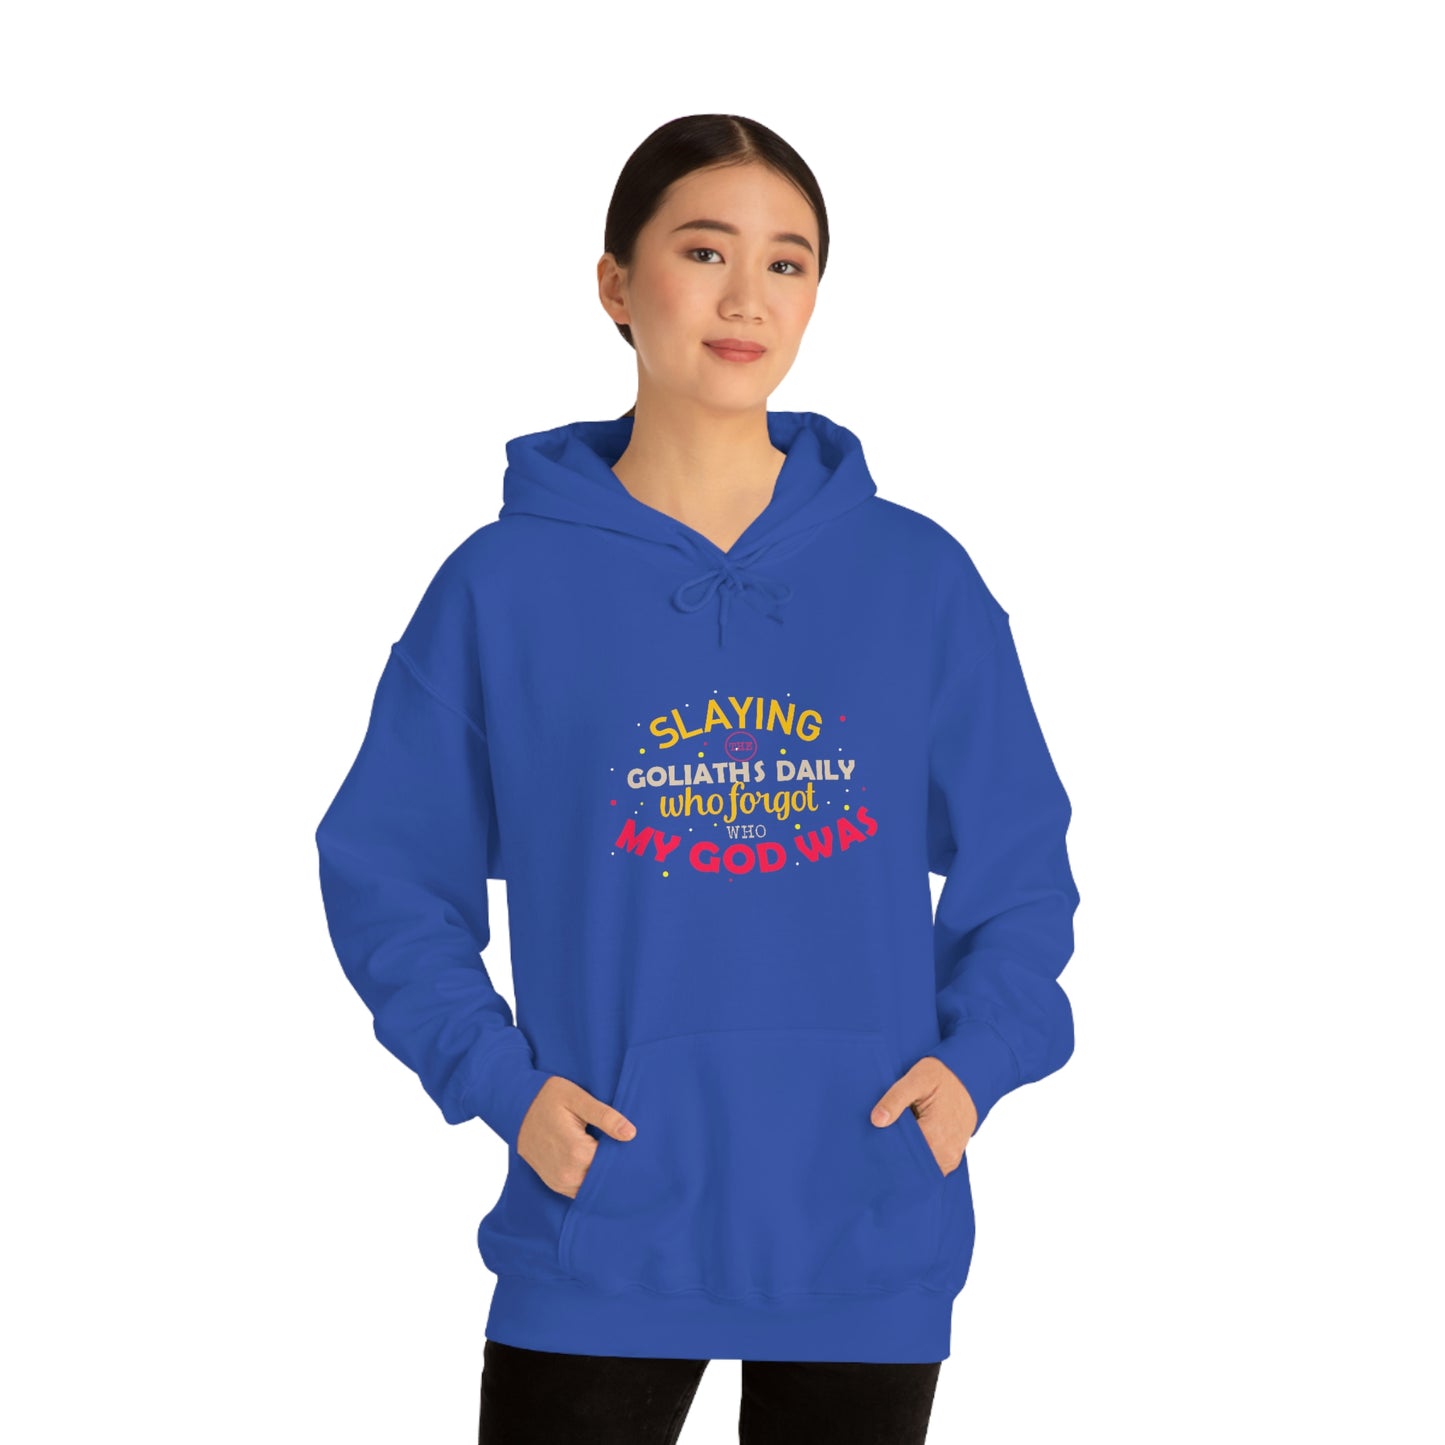 Slaying The Goliaths Daily Who Forgot Who My God Was  Unisex Pull On Hooded sweatshirt